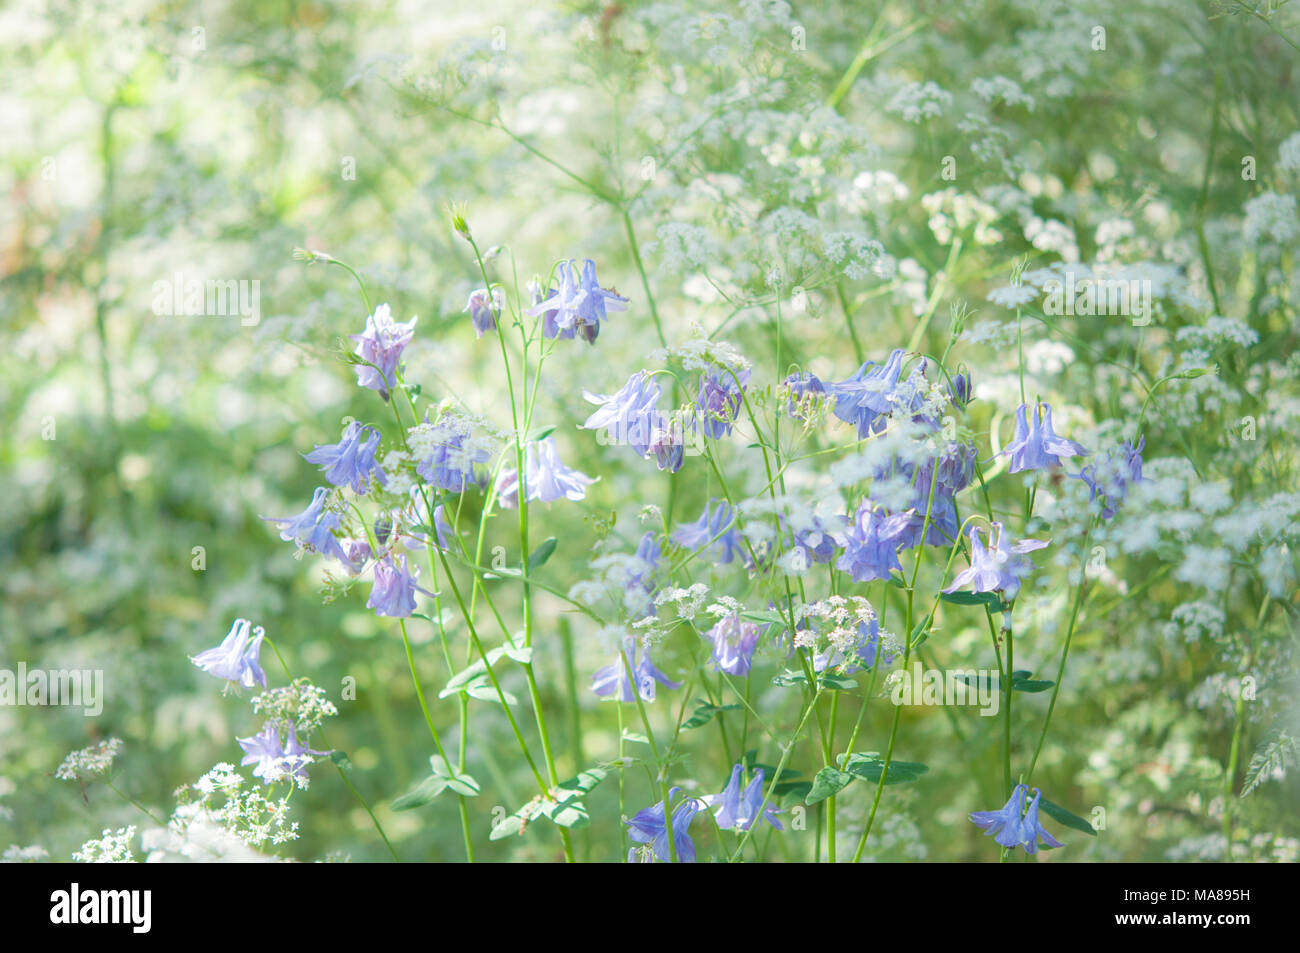 Pale blue Aquilegia flowers among light and frothy cow parsley in an English country garden. Stock Photo